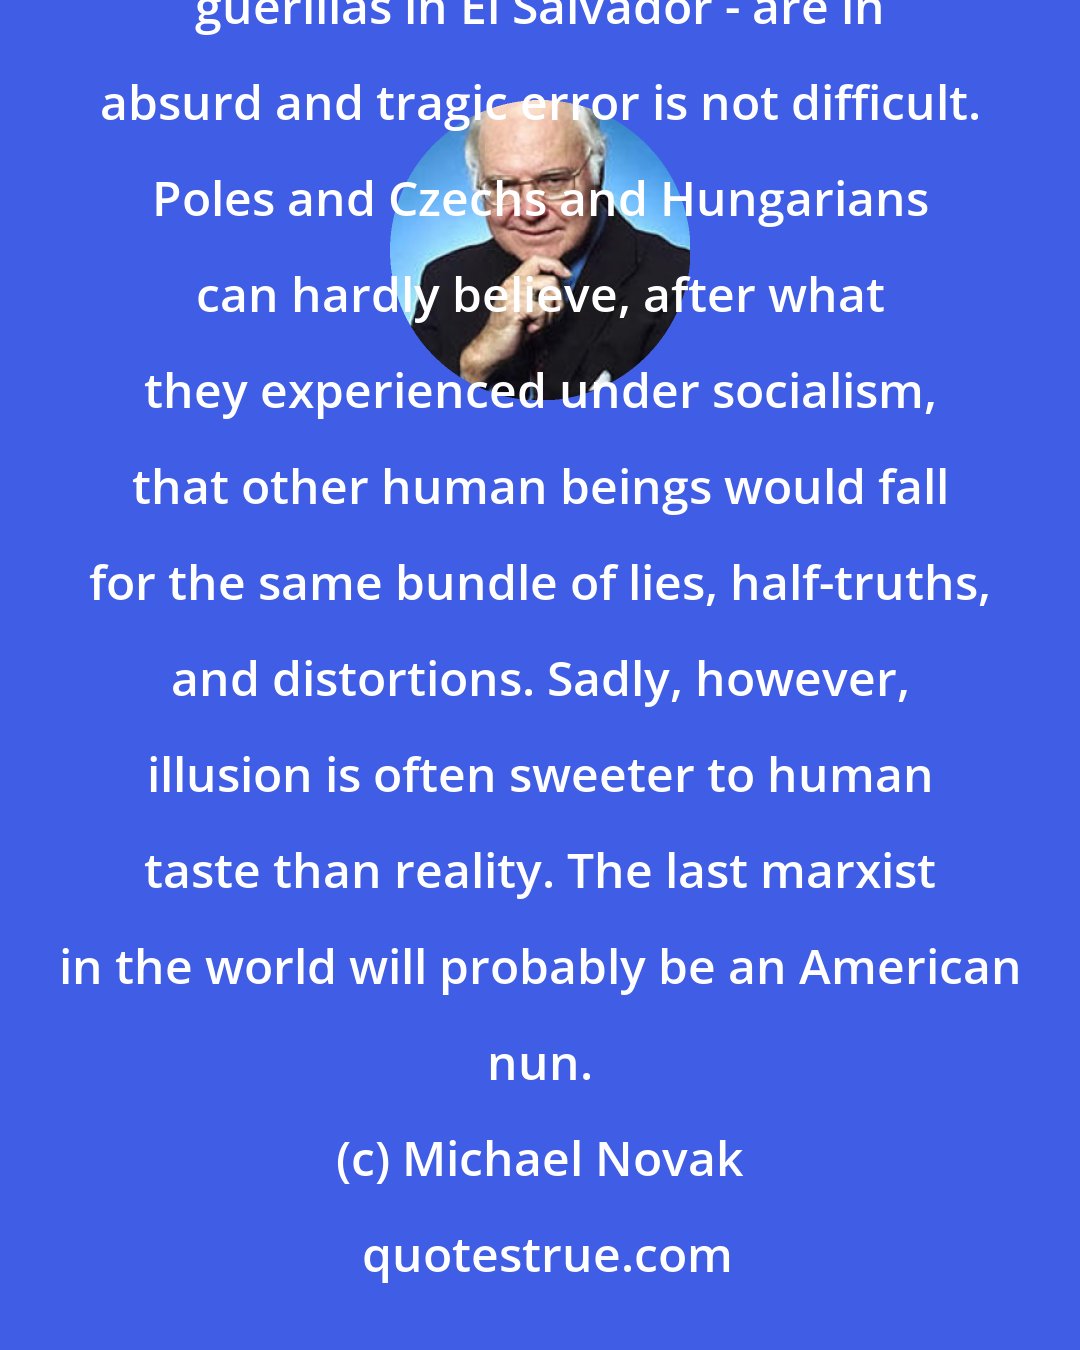 Michael Novak: To persuade thinking persons in Eastern Europe that Central American Marxists - the Sandinistas, the guerillas in El Salvador - are in absurd and tragic error is not difficult. Poles and Czechs and Hungarians can hardly believe, after what they experienced under socialism, that other human beings would fall for the same bundle of lies, half-truths, and distortions. Sadly, however, illusion is often sweeter to human taste than reality. The last marxist in the world will probably be an American nun.